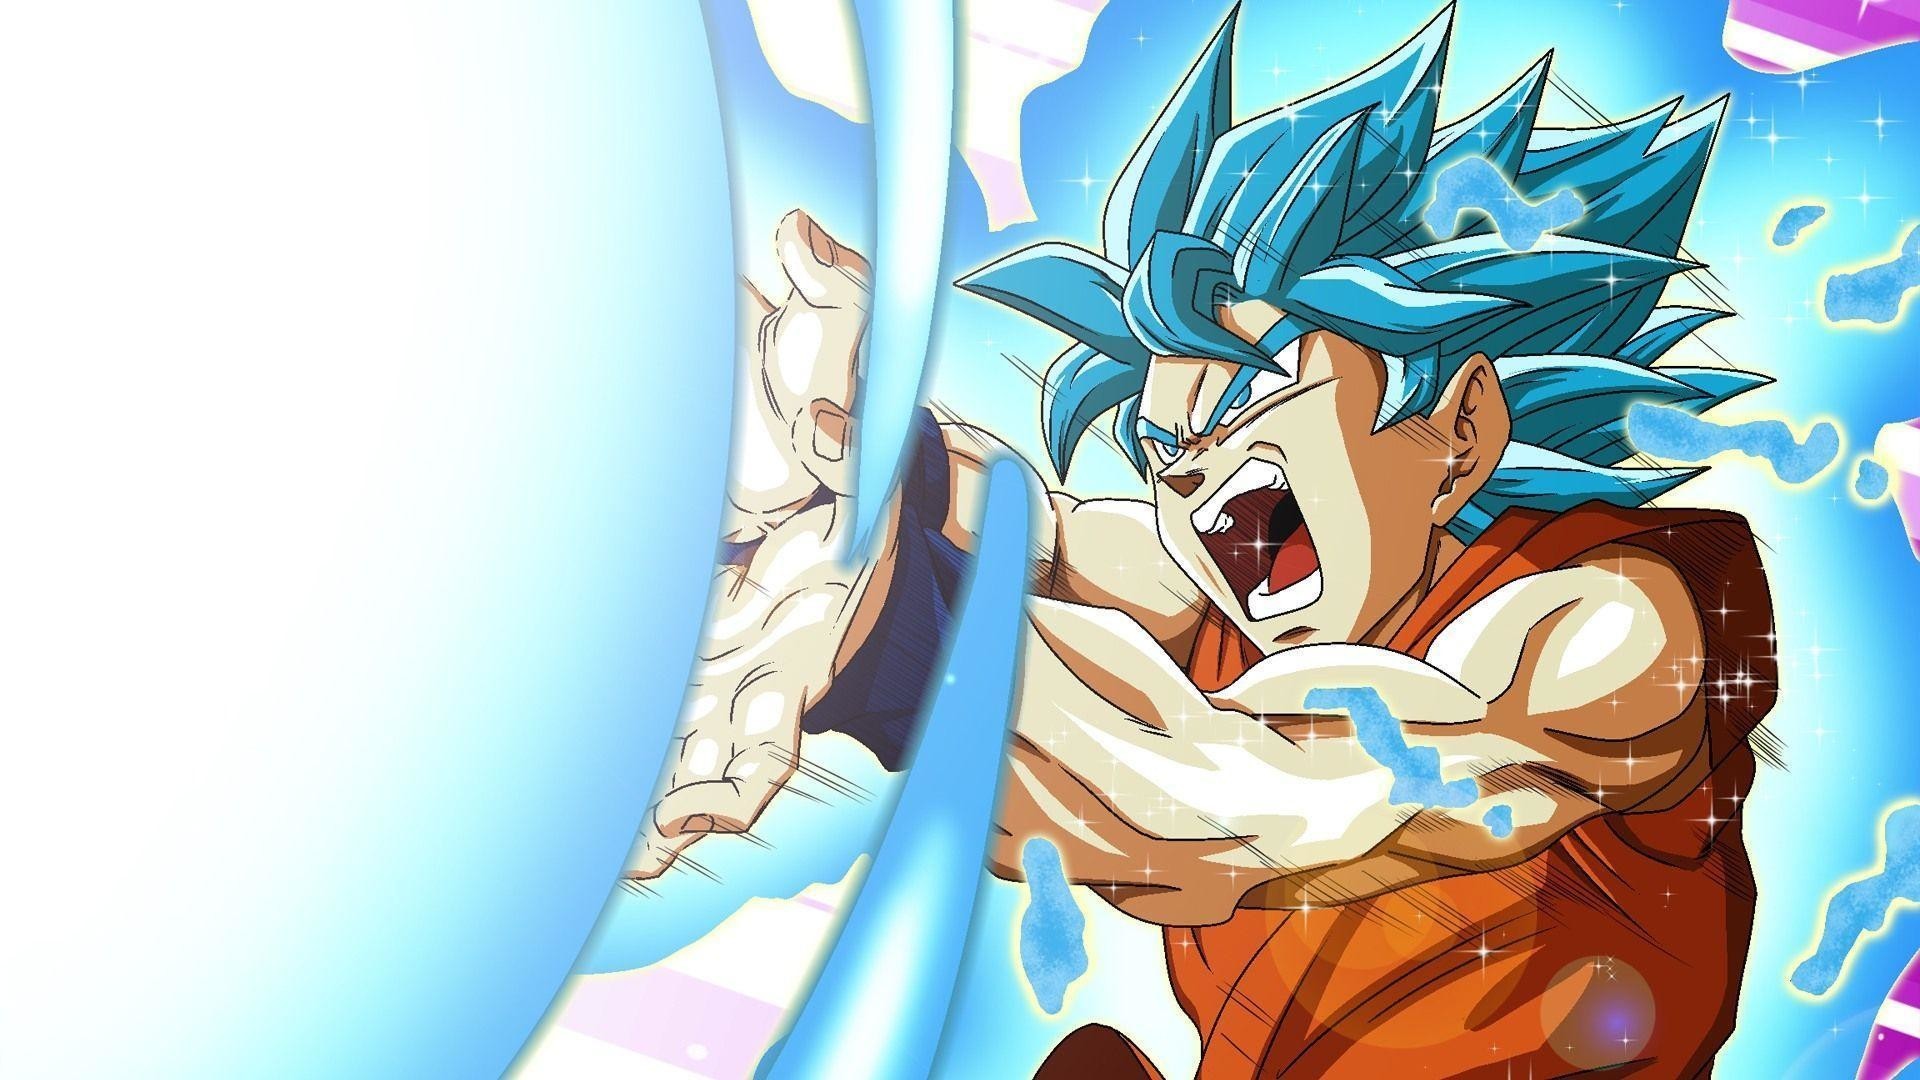 Best Goku SSJ Blue Wallpaper with image resolution 1920x1080 pixel. You can use this wallpaper as background for your desktop Computer Screensavers, Android or iPhone smartphones